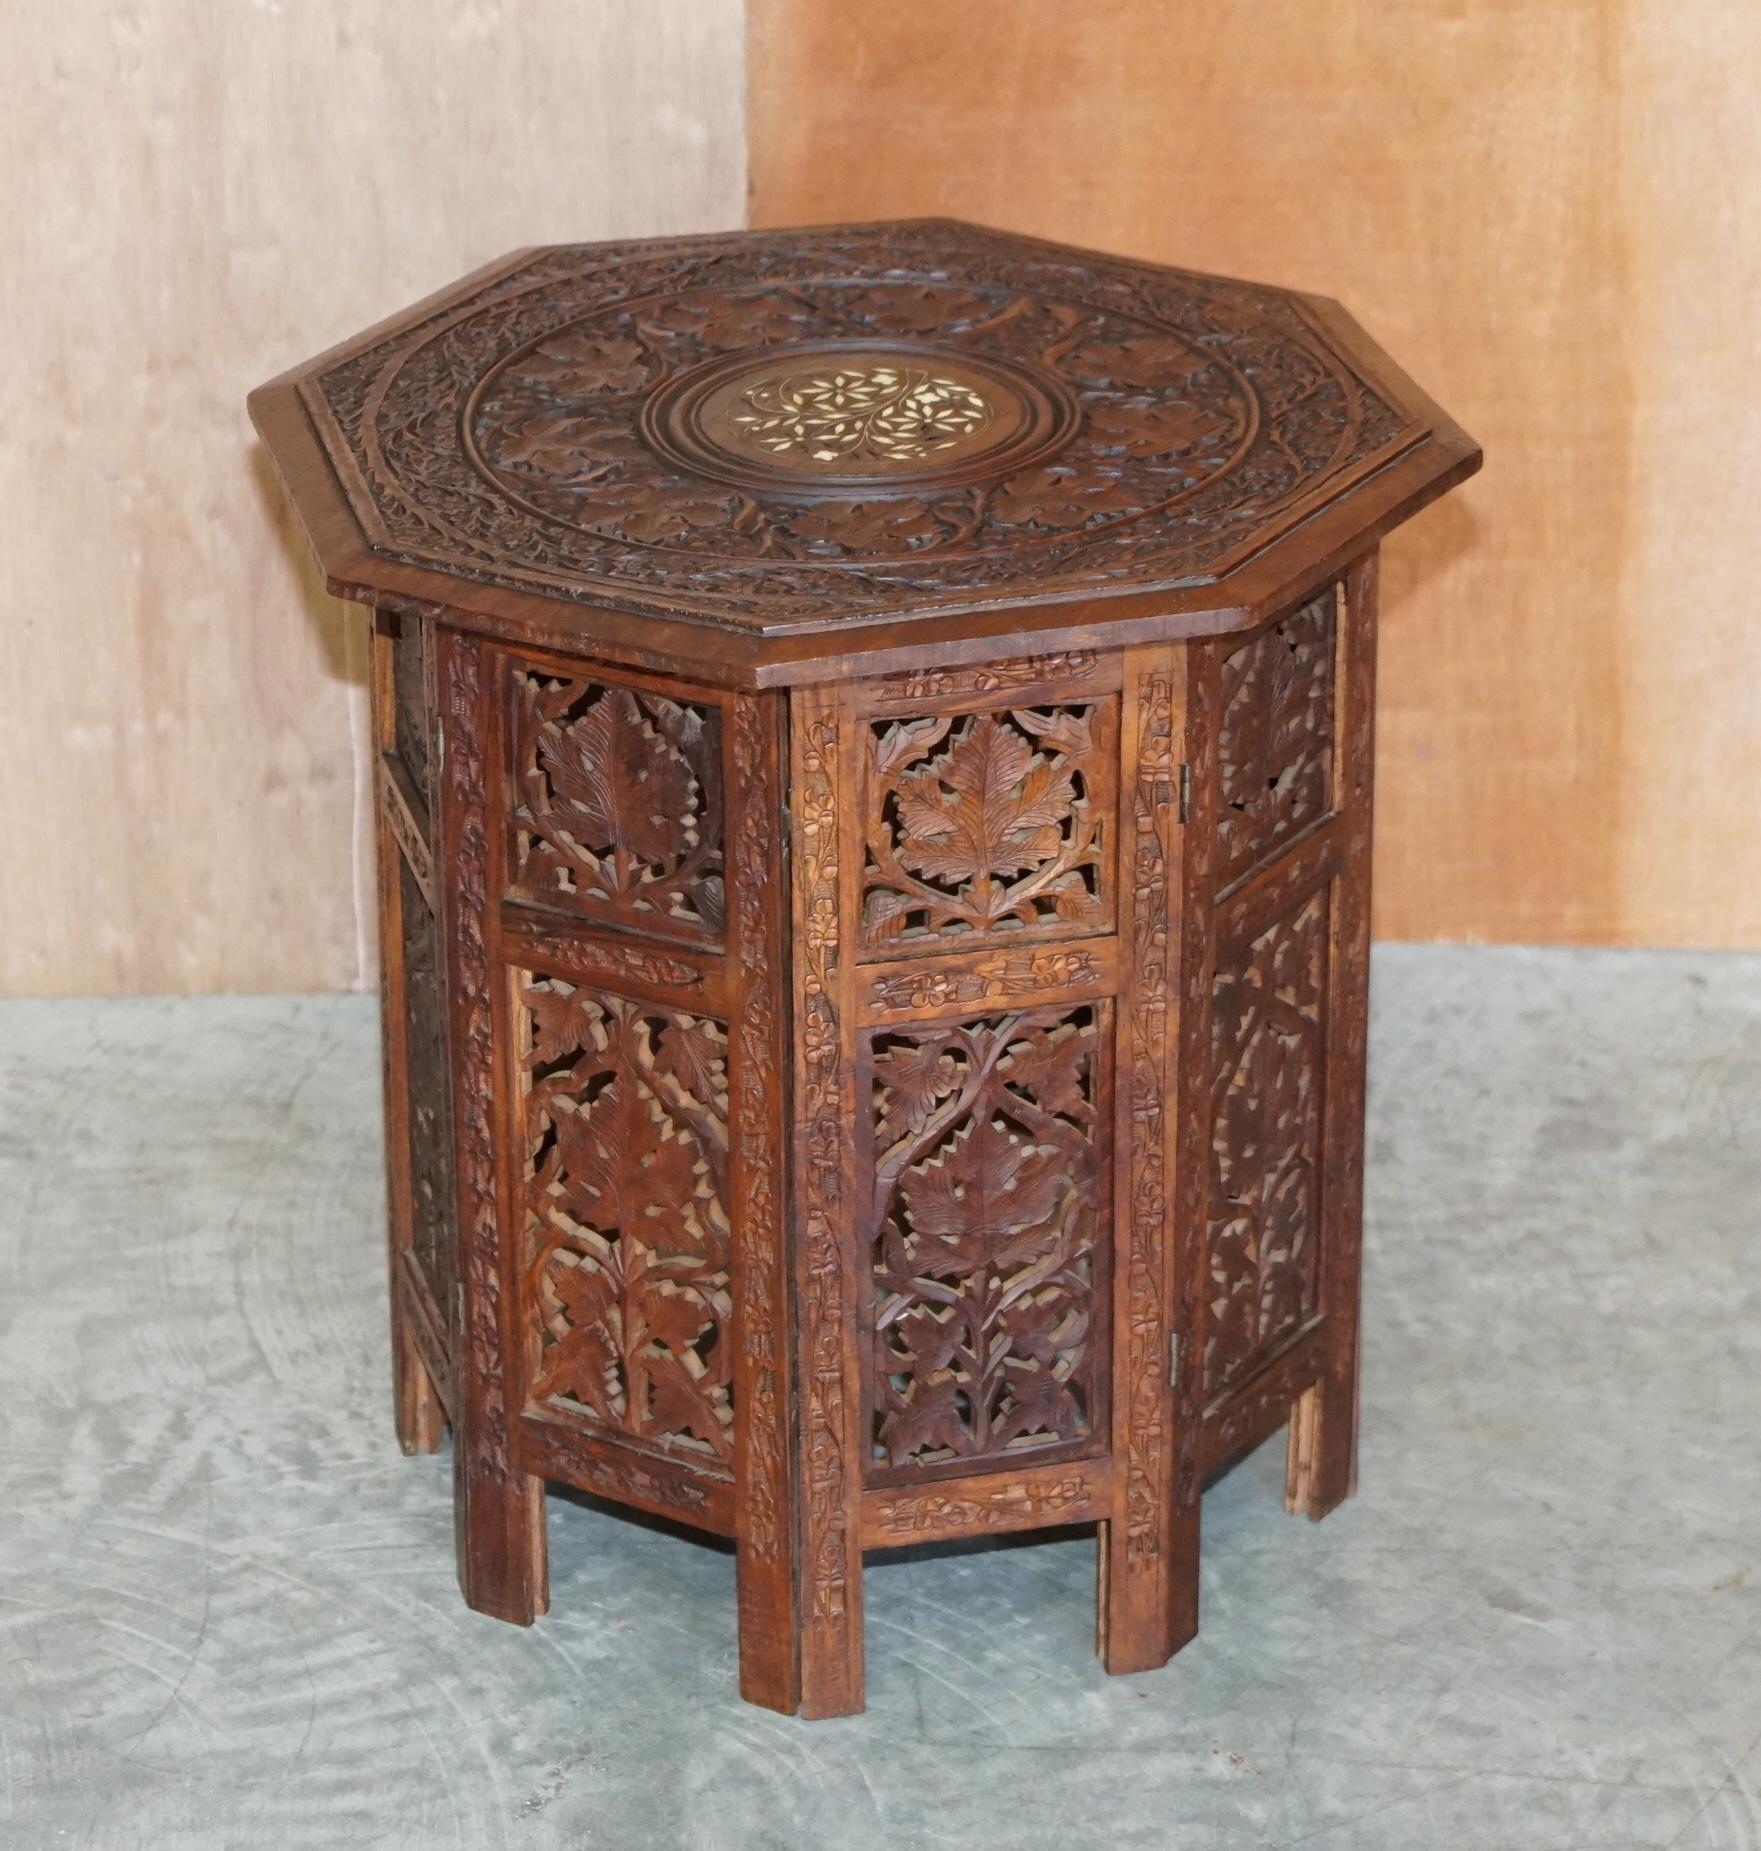 We are delighted to offer for sale this lovely hand carved from solid Rosewood, inlaid, Burmese side table of medium proportions.

A very good looking and decorative table, this would be used as a lamp wine or side table 

Carved from top to